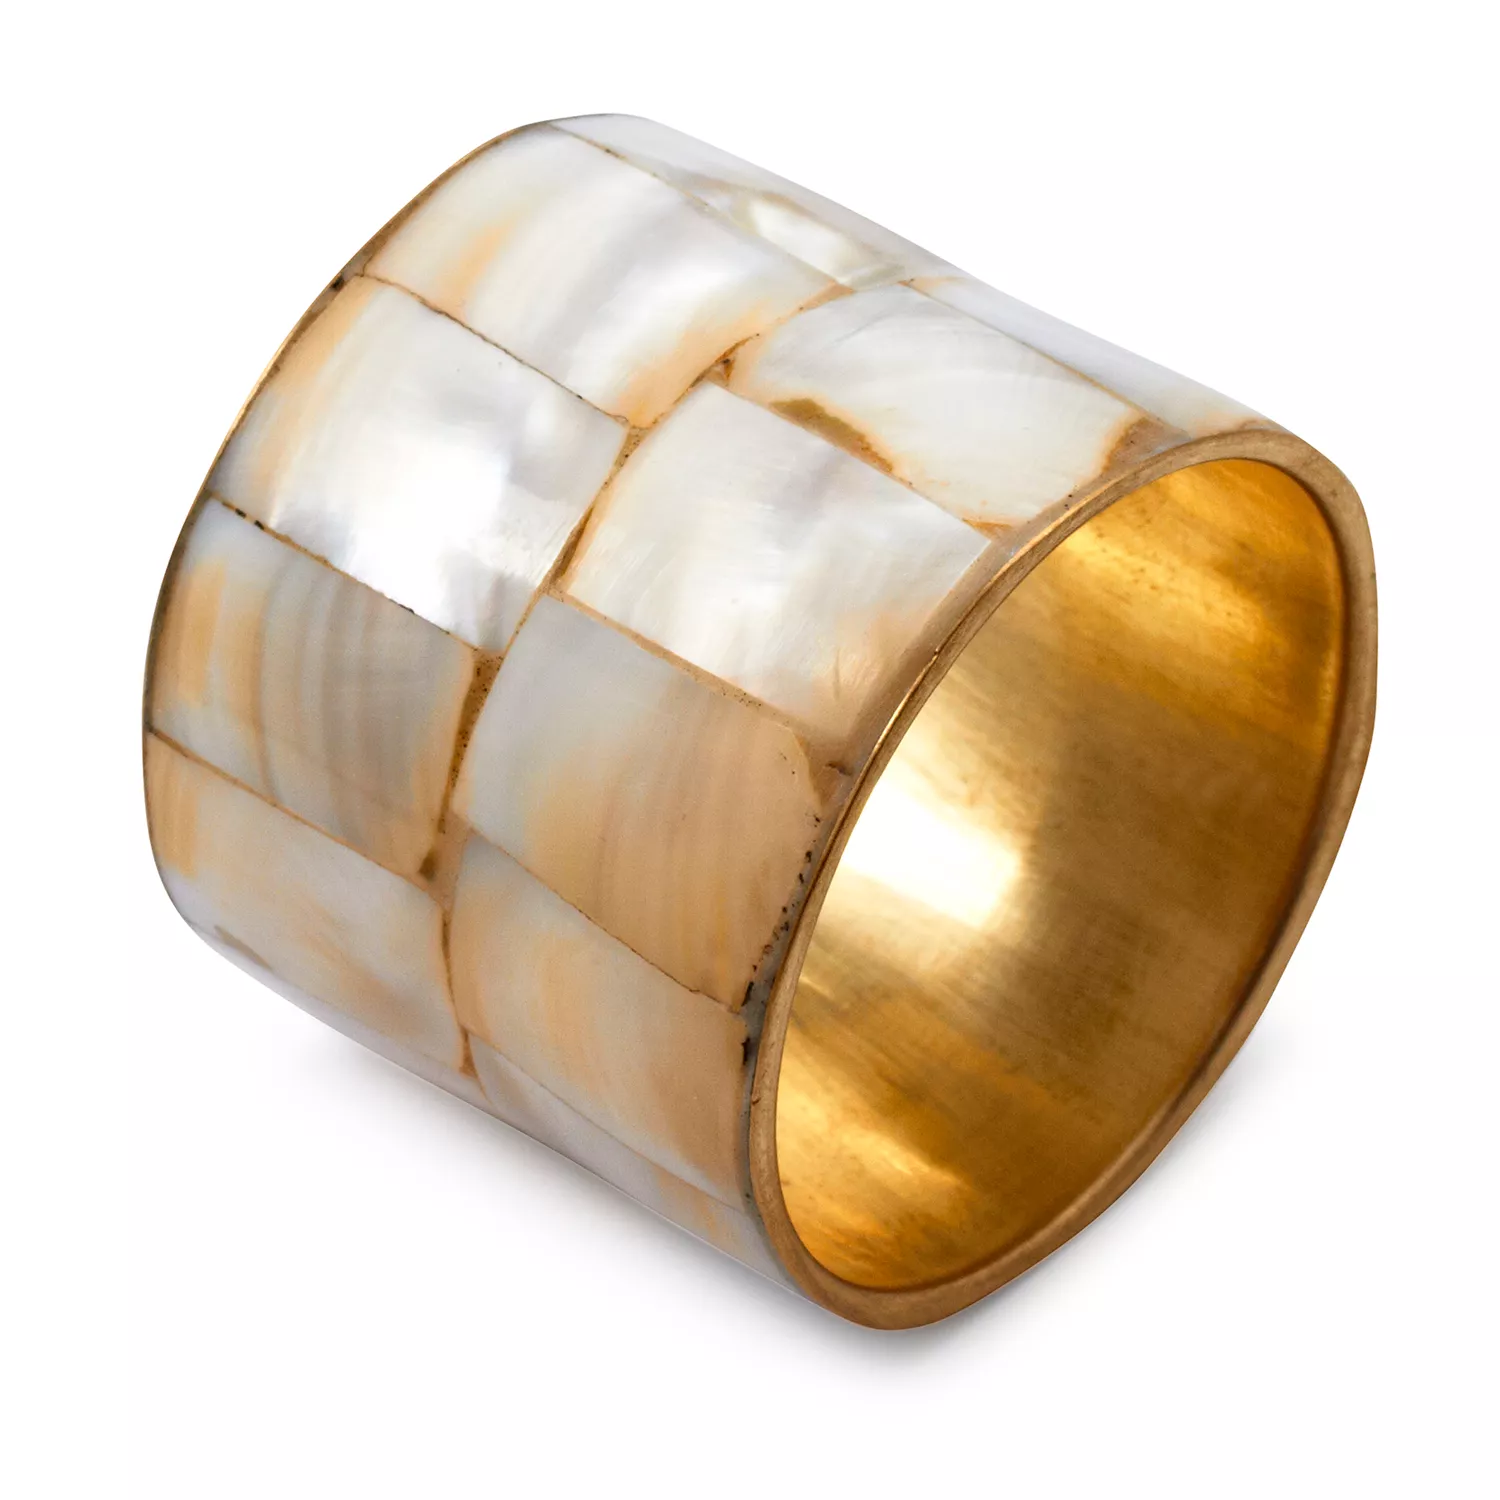 Sur La Table Mother-Of-Pearl Napkin Ring